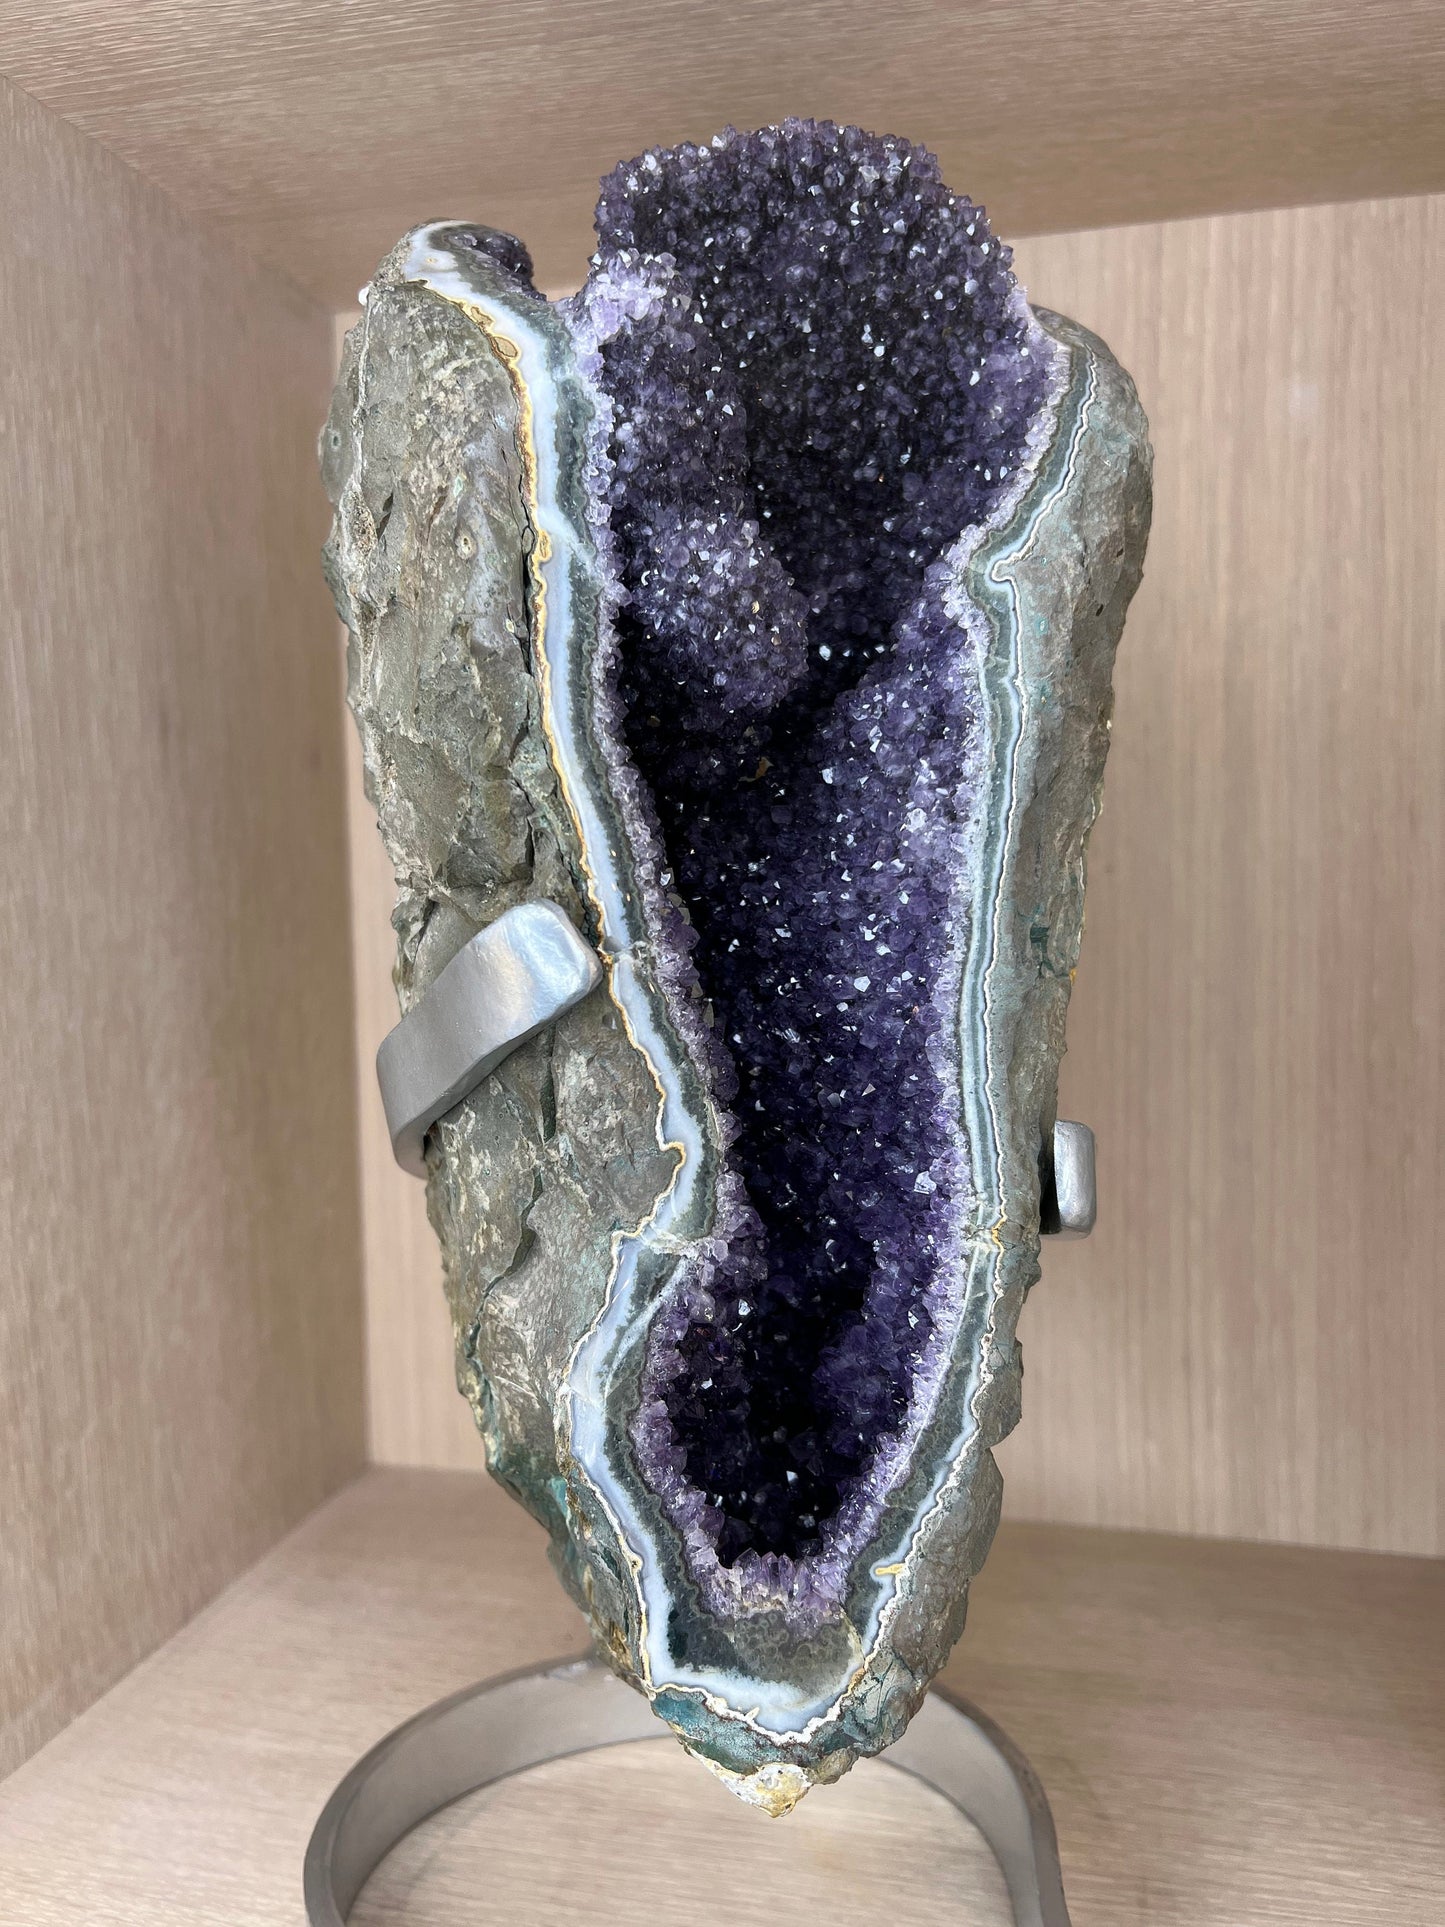 Large Amethyst Geode Crystal Natural self-standing rock for tabletop home decor healing stone 10.25lb